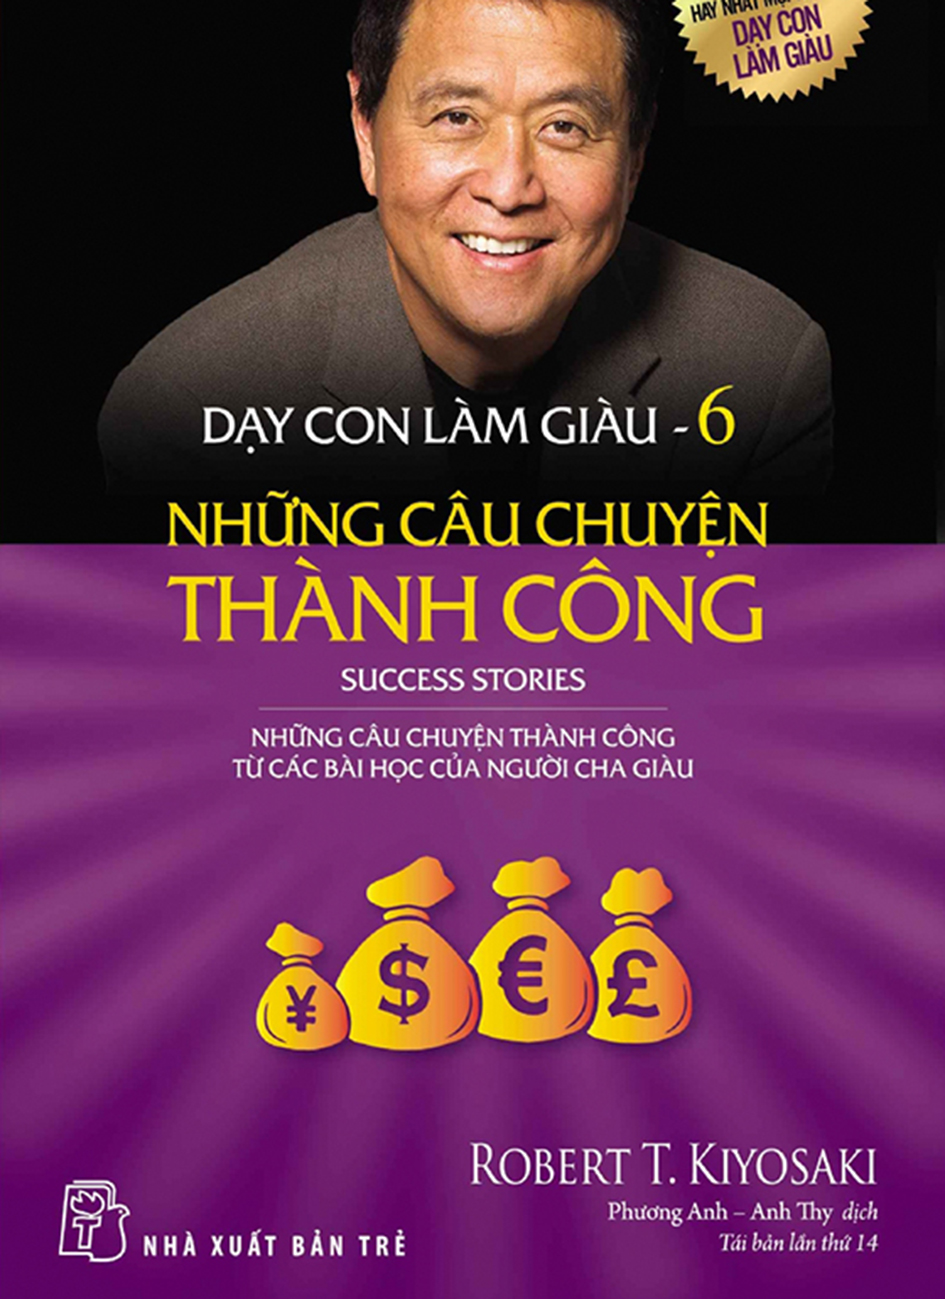 day con lam giau 6